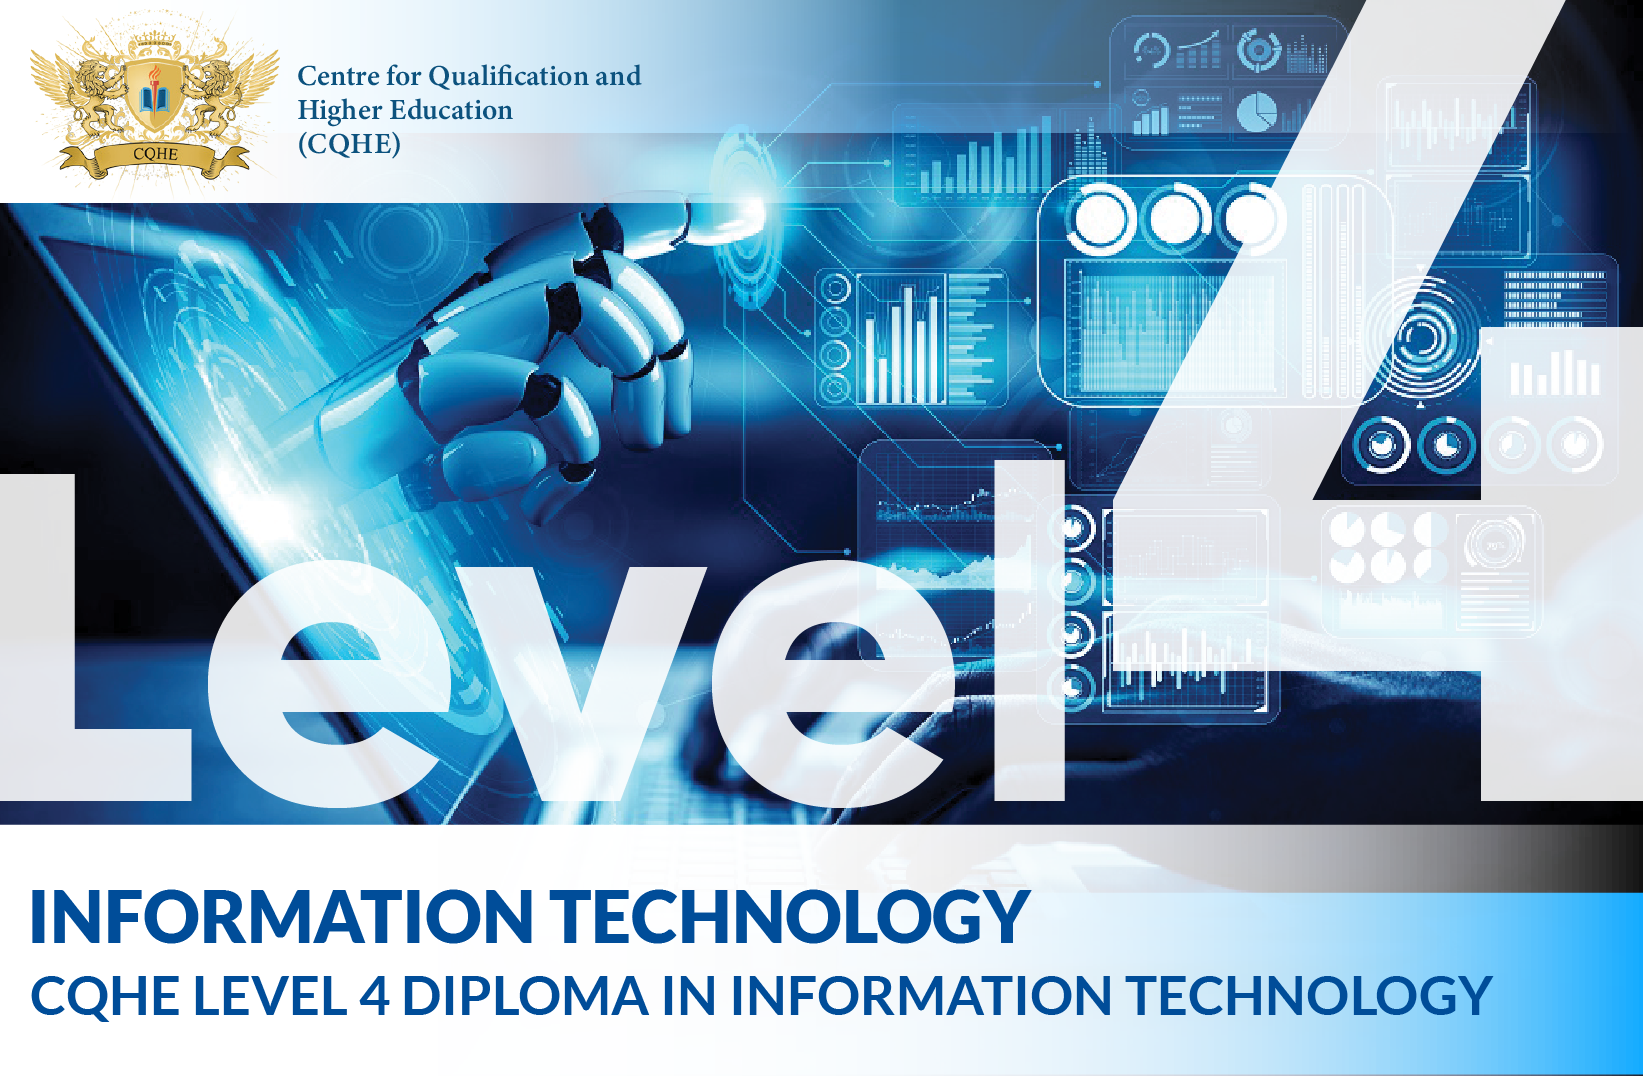 CQHE Level 4 Diploma in Information Technology